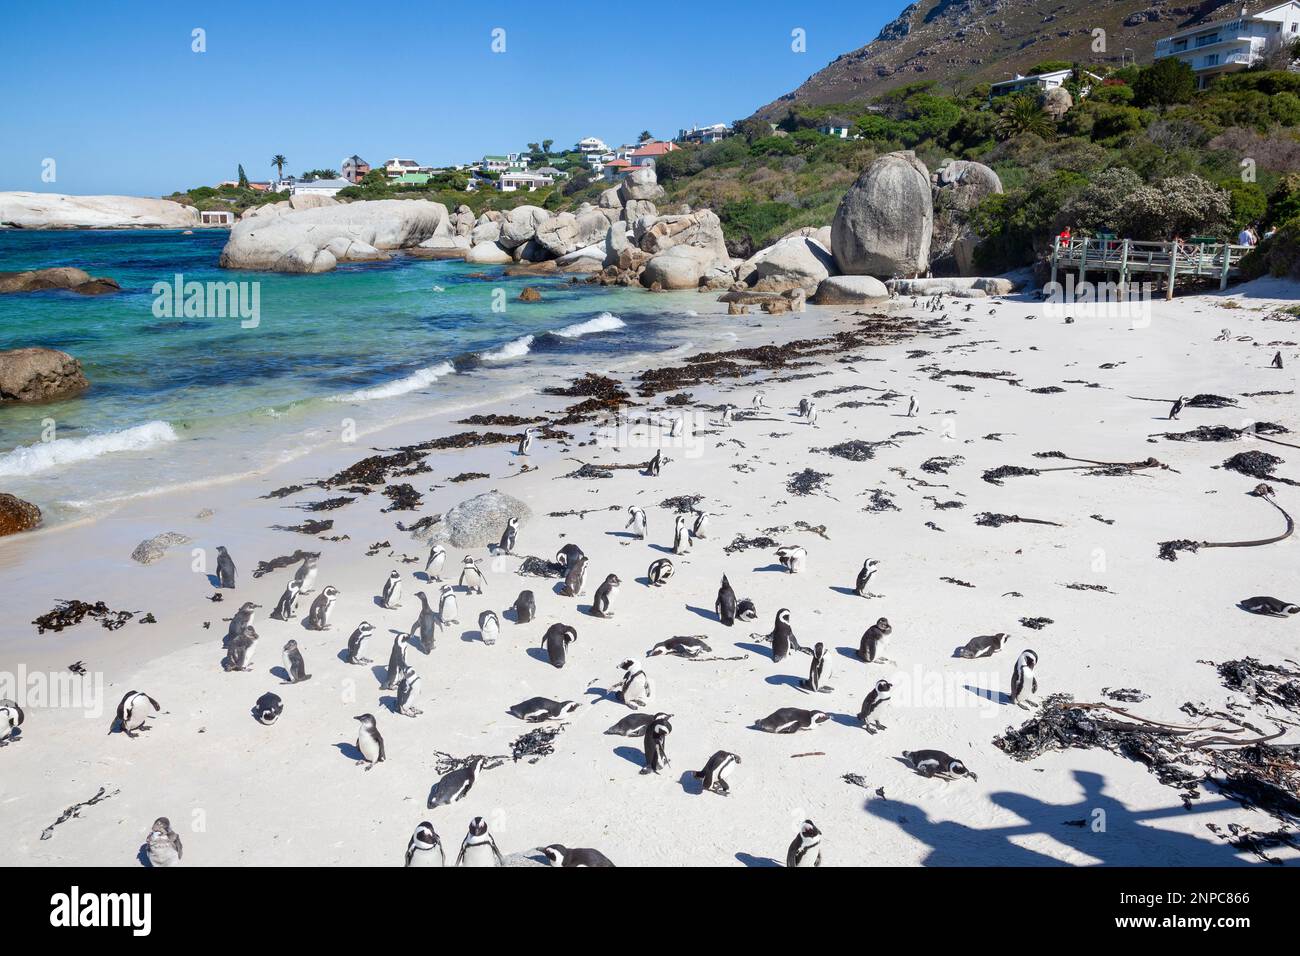 African Penguin breeding colony at Boulders Beach, Simonstown, Cape Town, Western Cape, South Africa. This bird is listed as Threatened due to populat Stock Photo